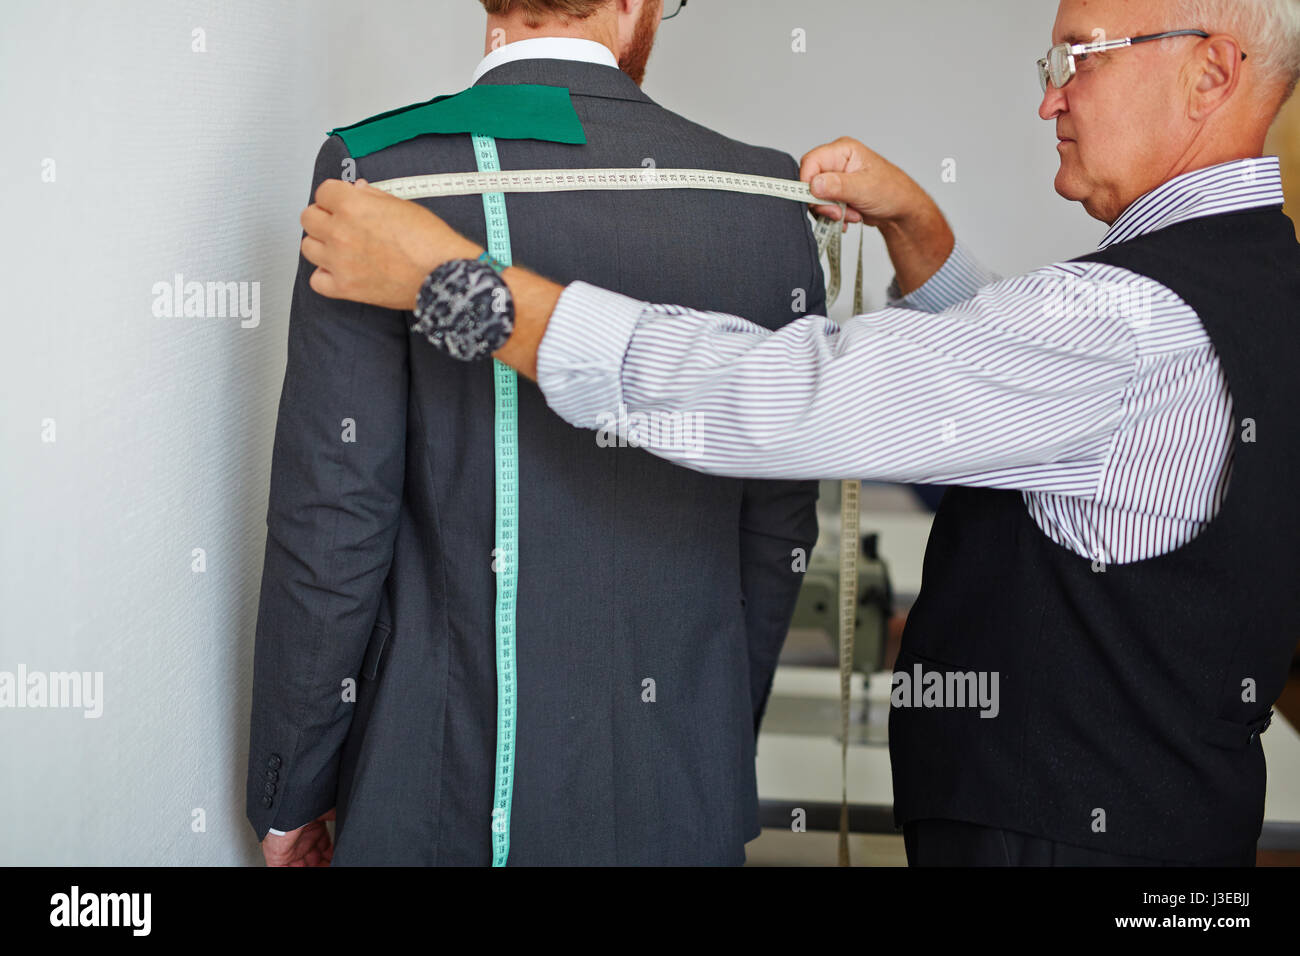 Tailor Measuring Back of Client to Make Suit Stock Photo